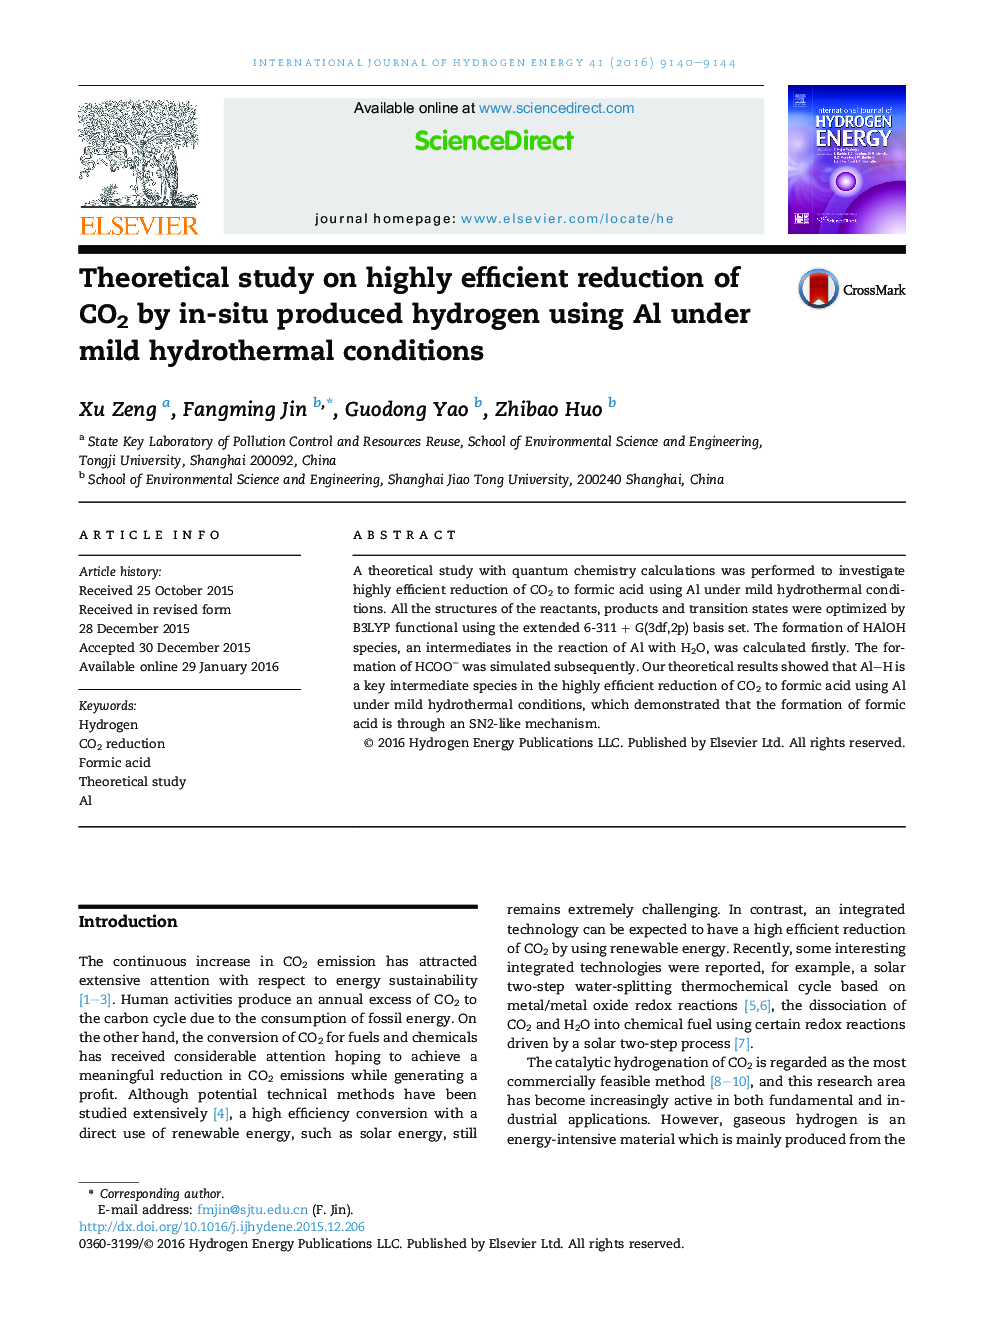 Theoretical study on highly efficient reduction of CO2 by in-situ produced hydrogen using Al under mild hydrothermal conditions